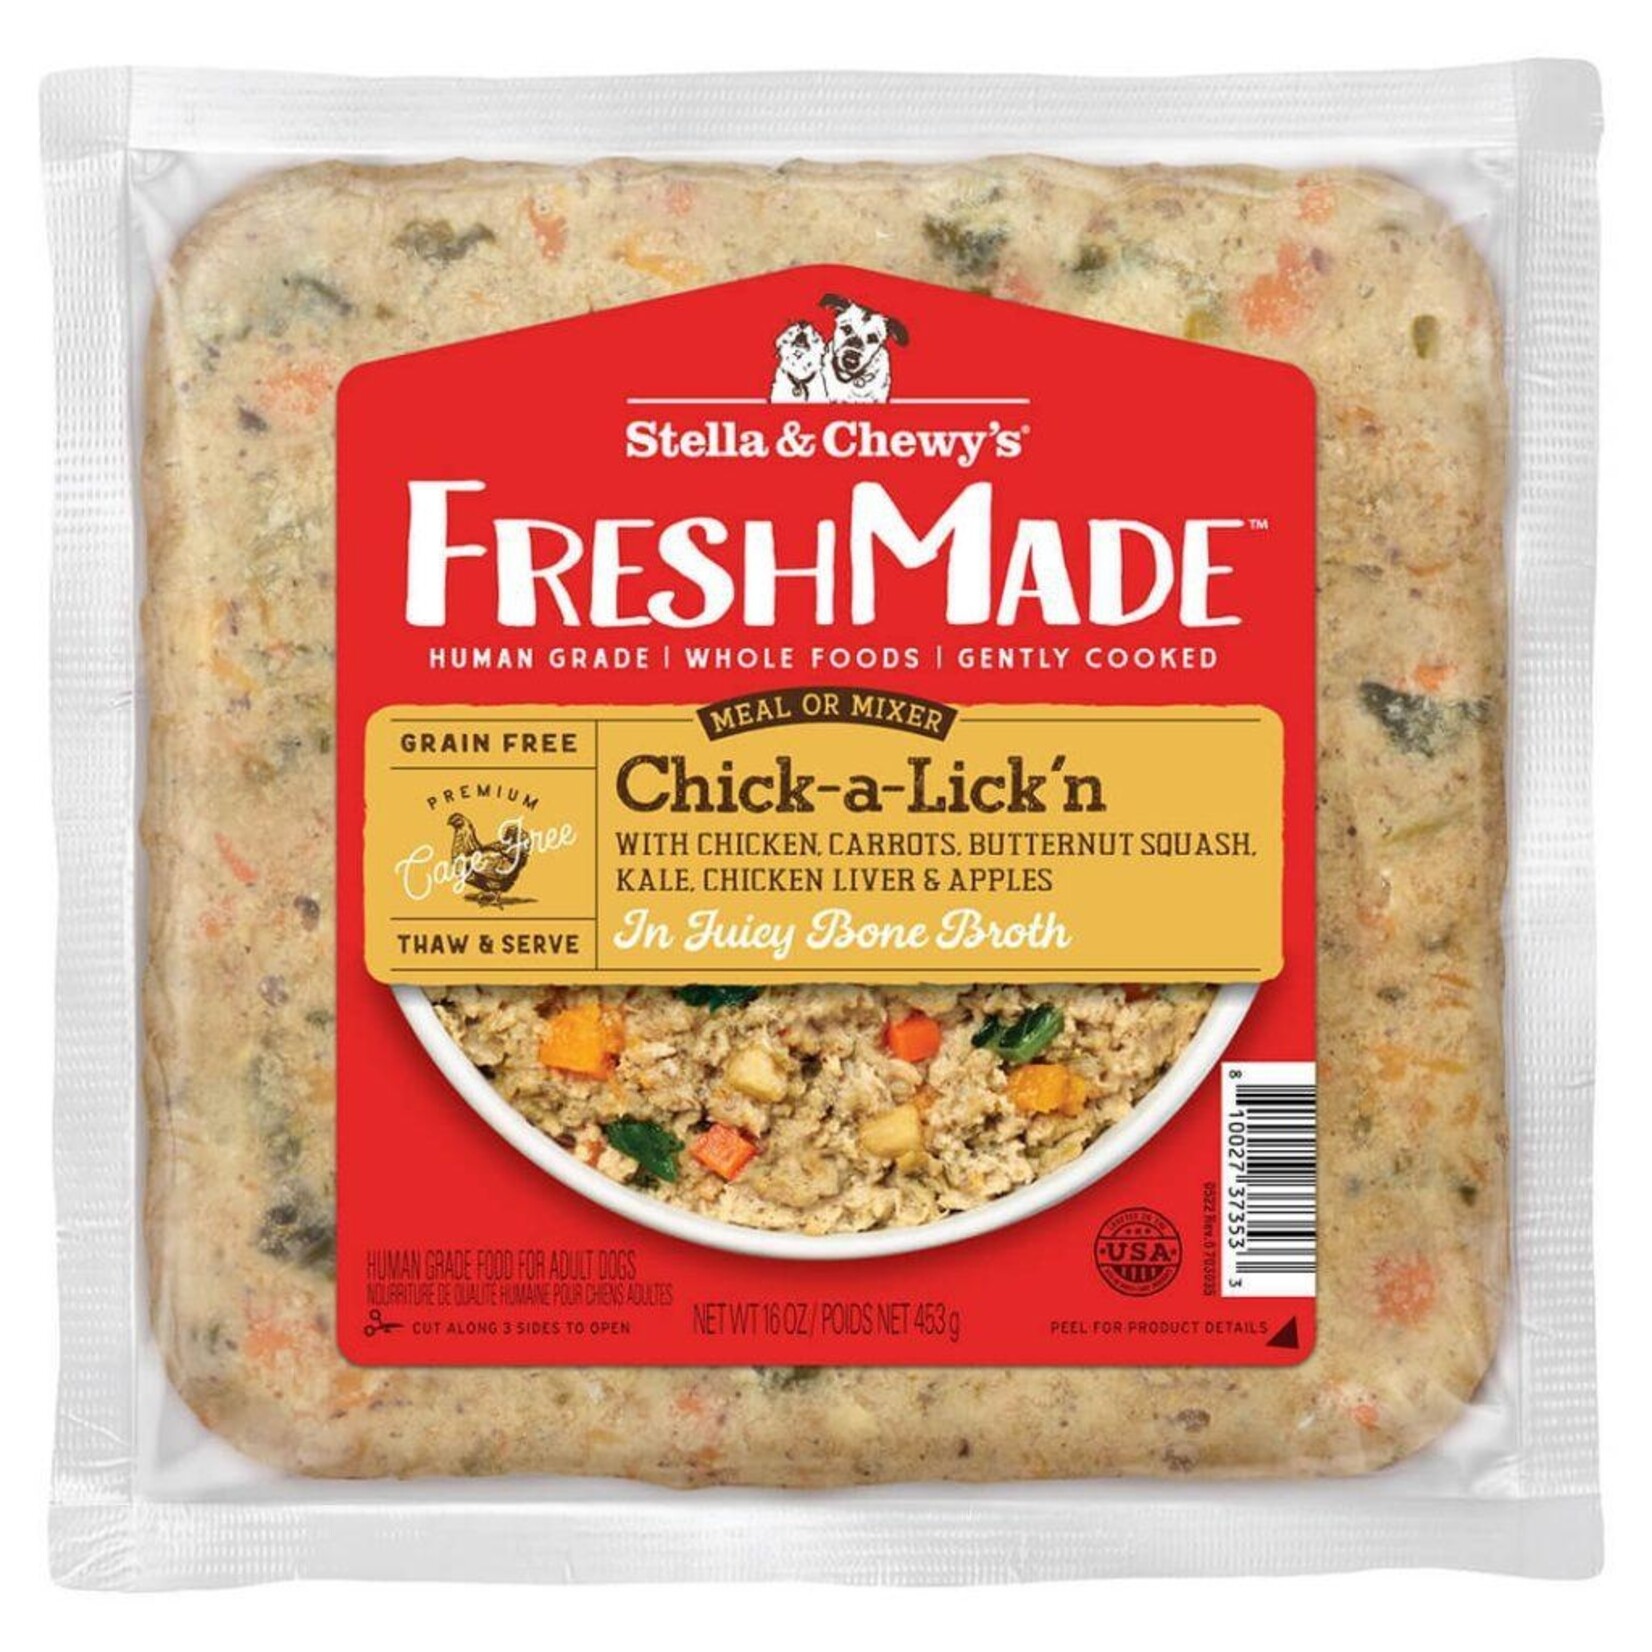 Stella & Chewy's Stella & Chewy Frozen Fresh Made Chick-a-Lick'n 16oz